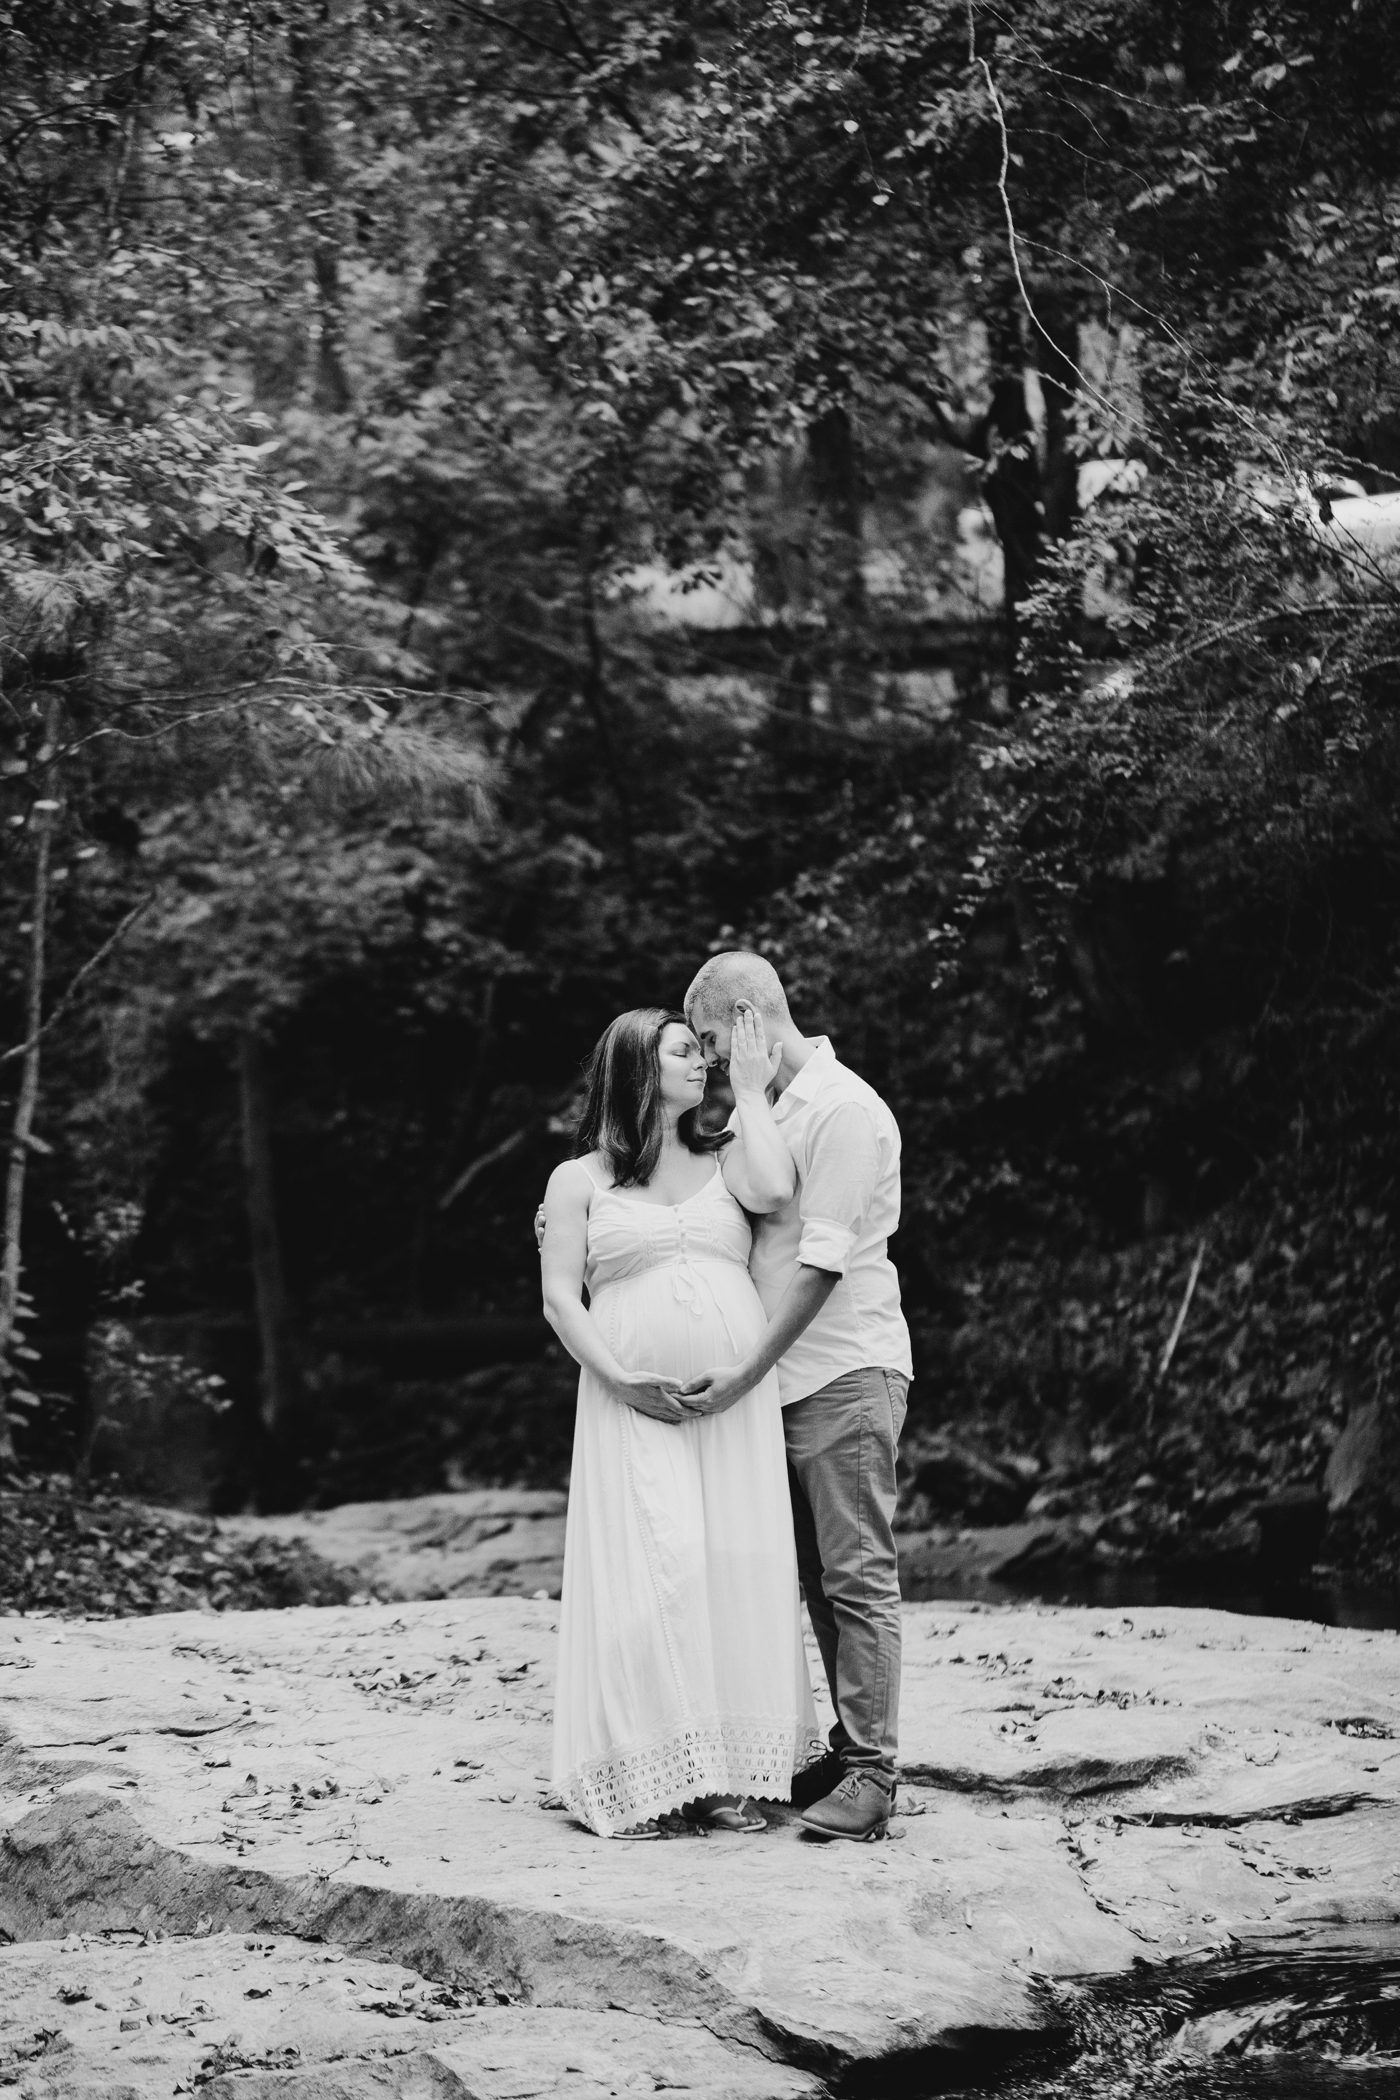 Alison & Tim’s Fall Maternity Session in Athens, Georgia at Ben Burton Park | Izzy and Co.